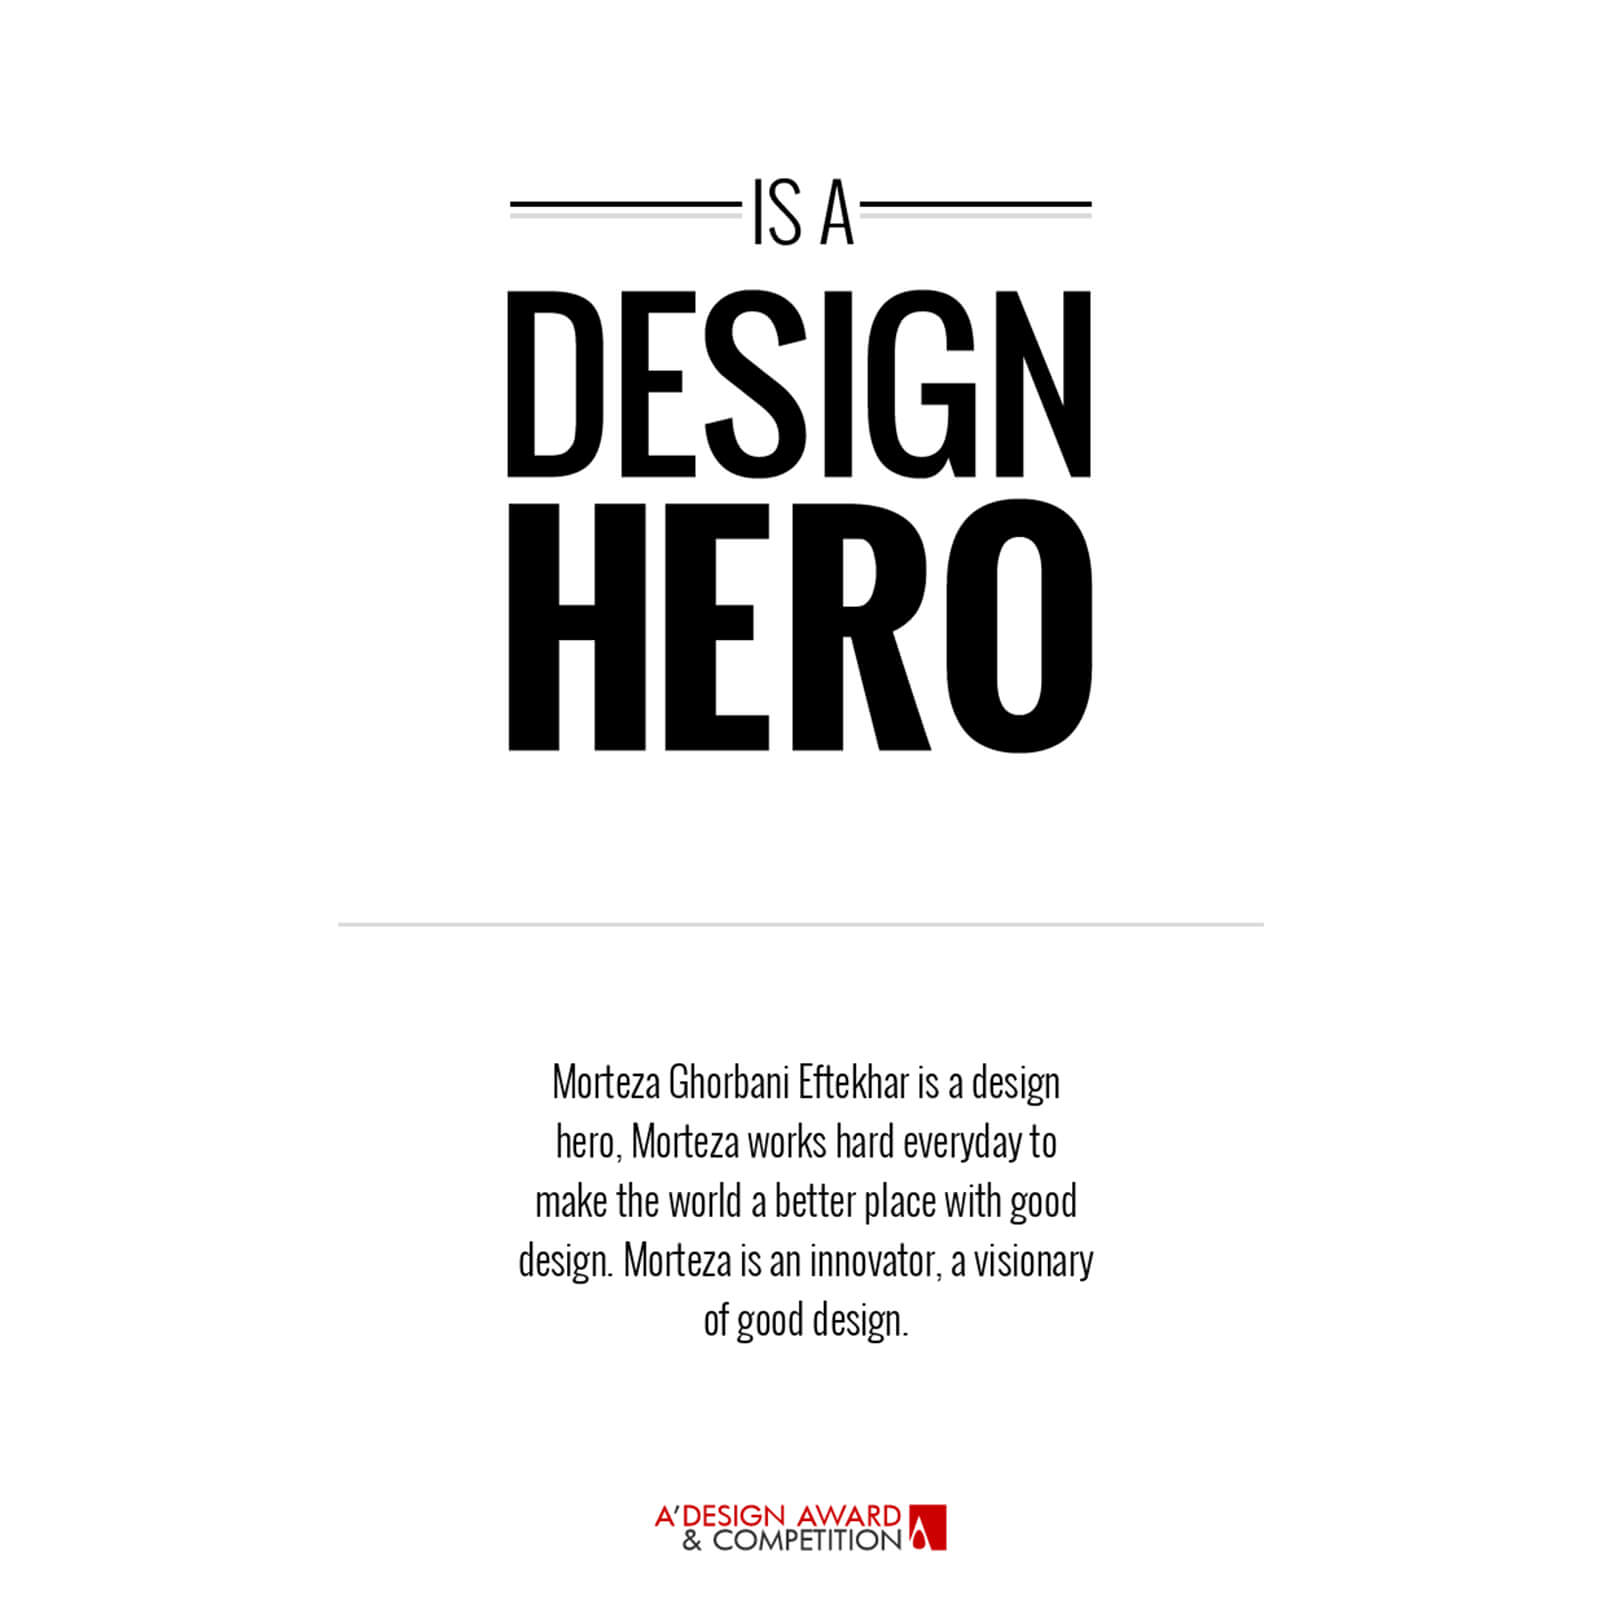 Design Hero of the year by A'Design Award